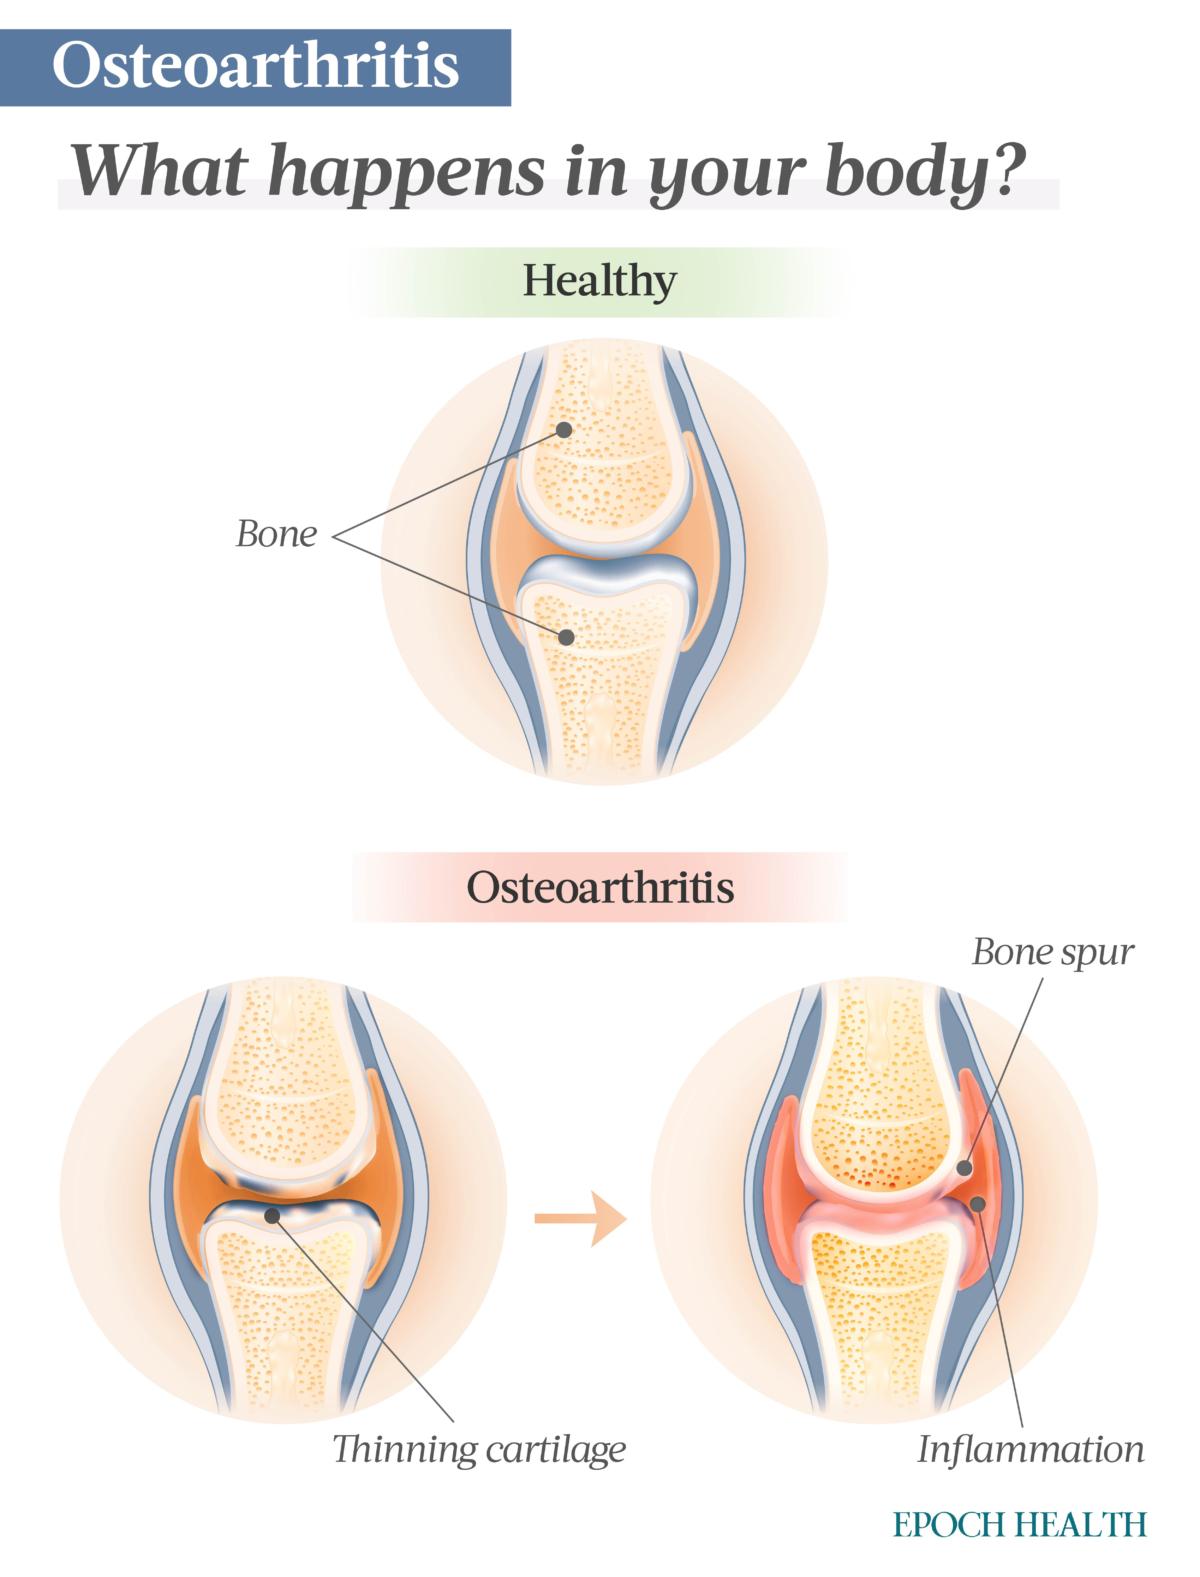  In primary osteoarthritis, an overproduction of enzymes triggers the deterioration of cartilage and inflammation, and eventually, bone spurs. (The Epoch Times)